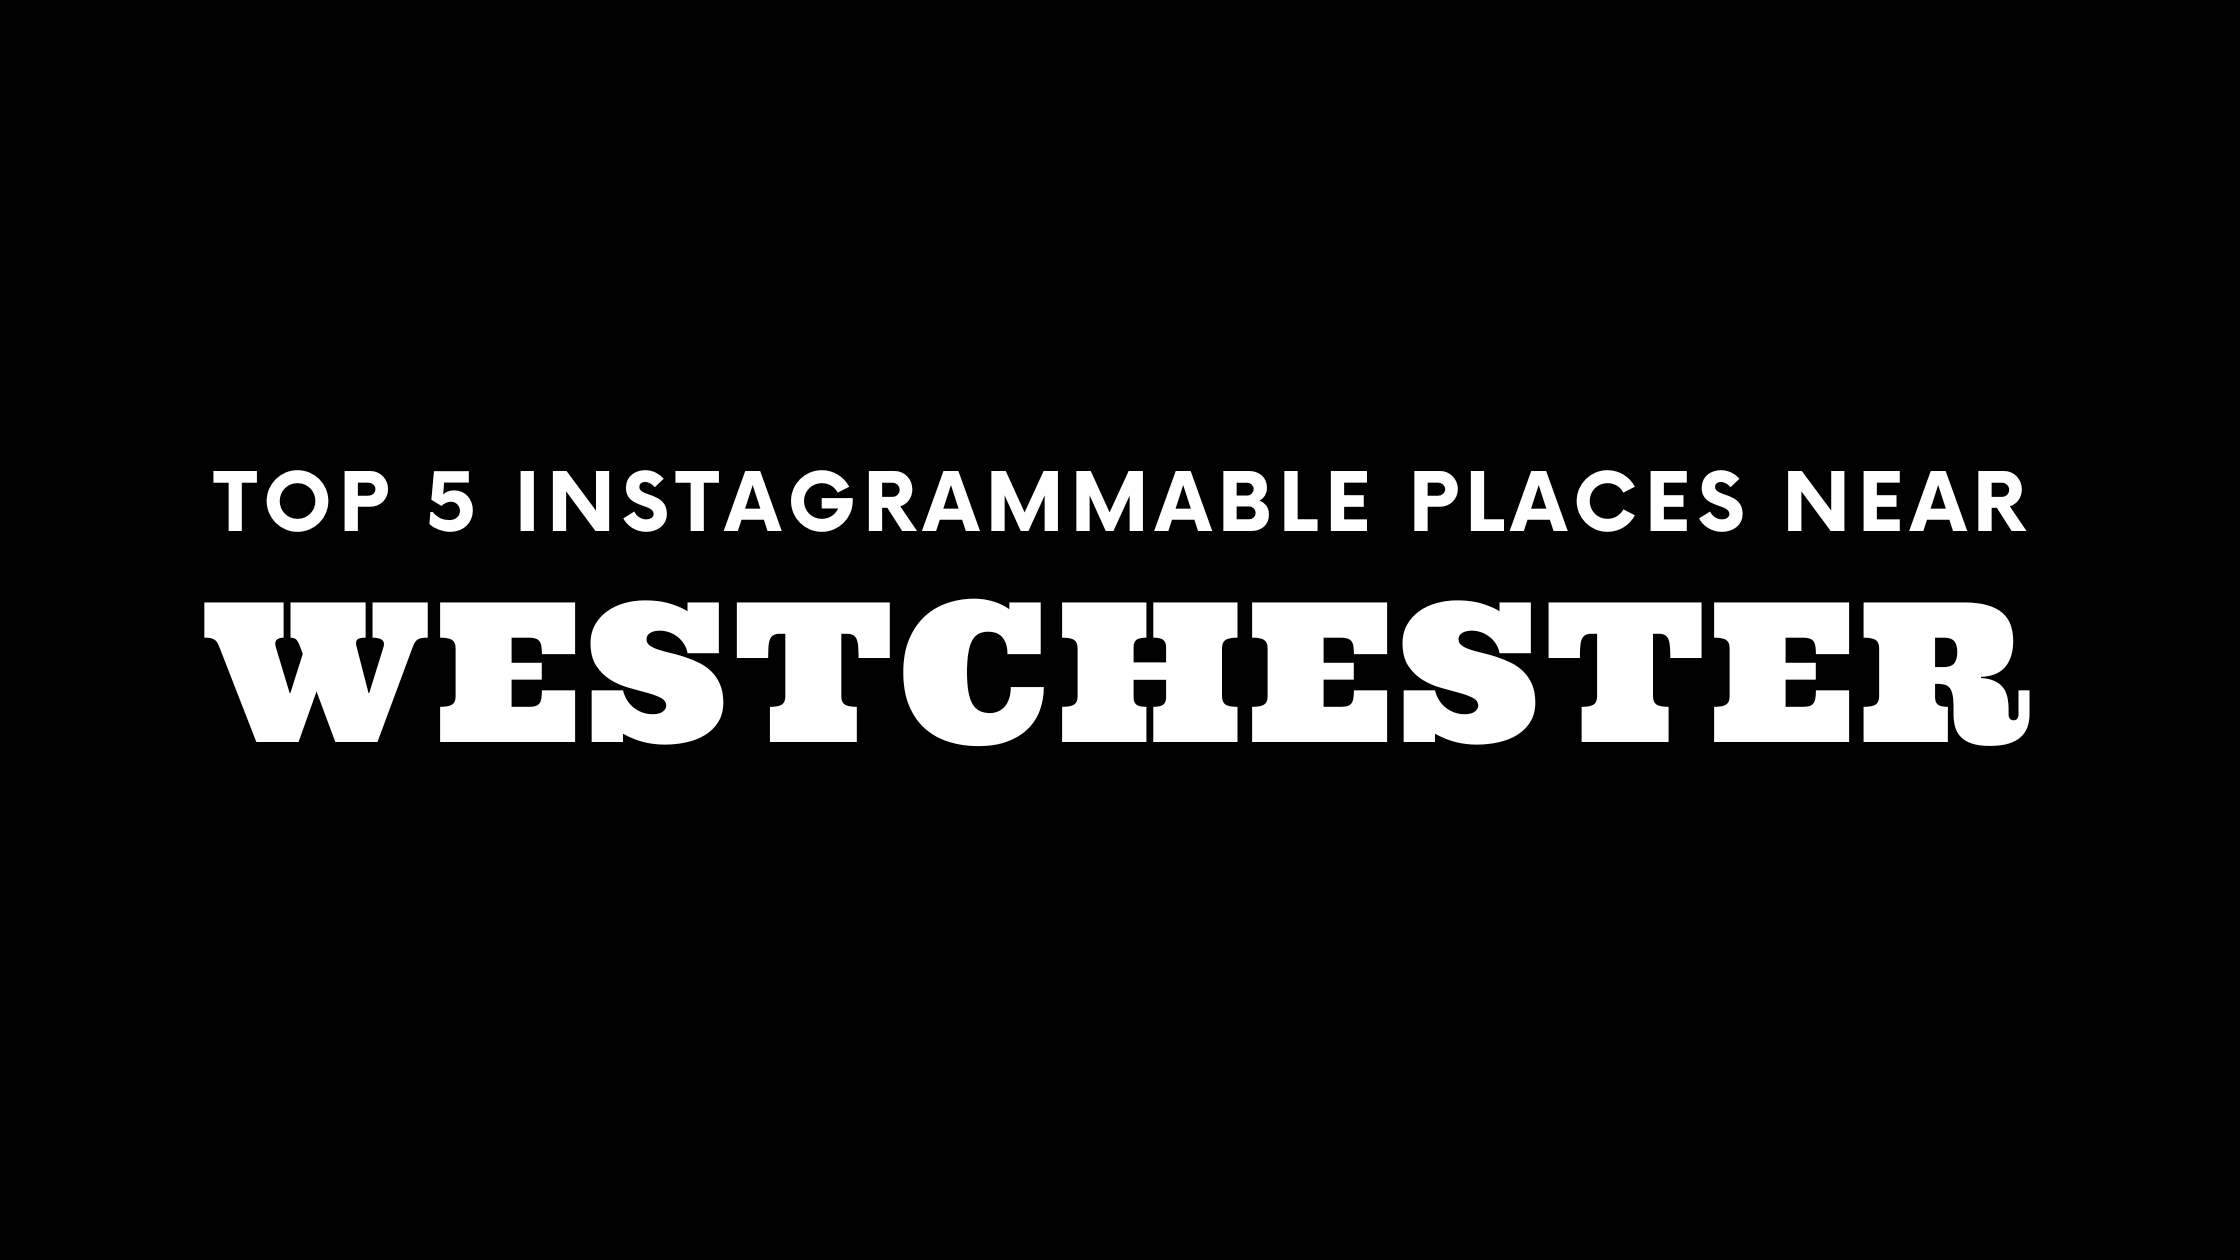 Top 5 Instagrammable Places in Westchester